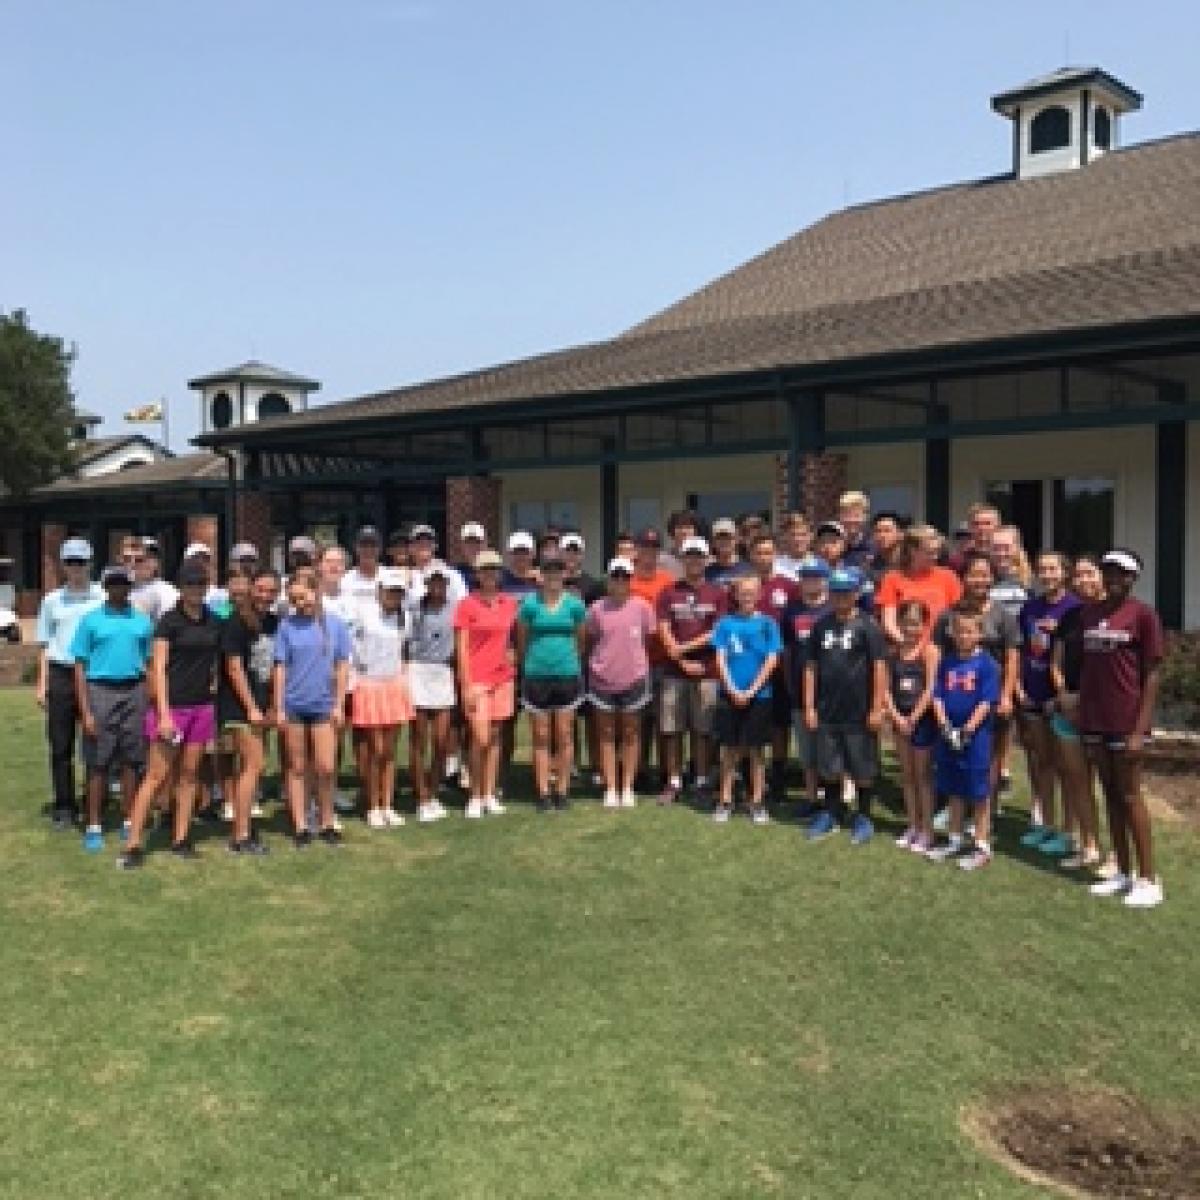 Clean up day at Meadowbrook Farms Golf Club